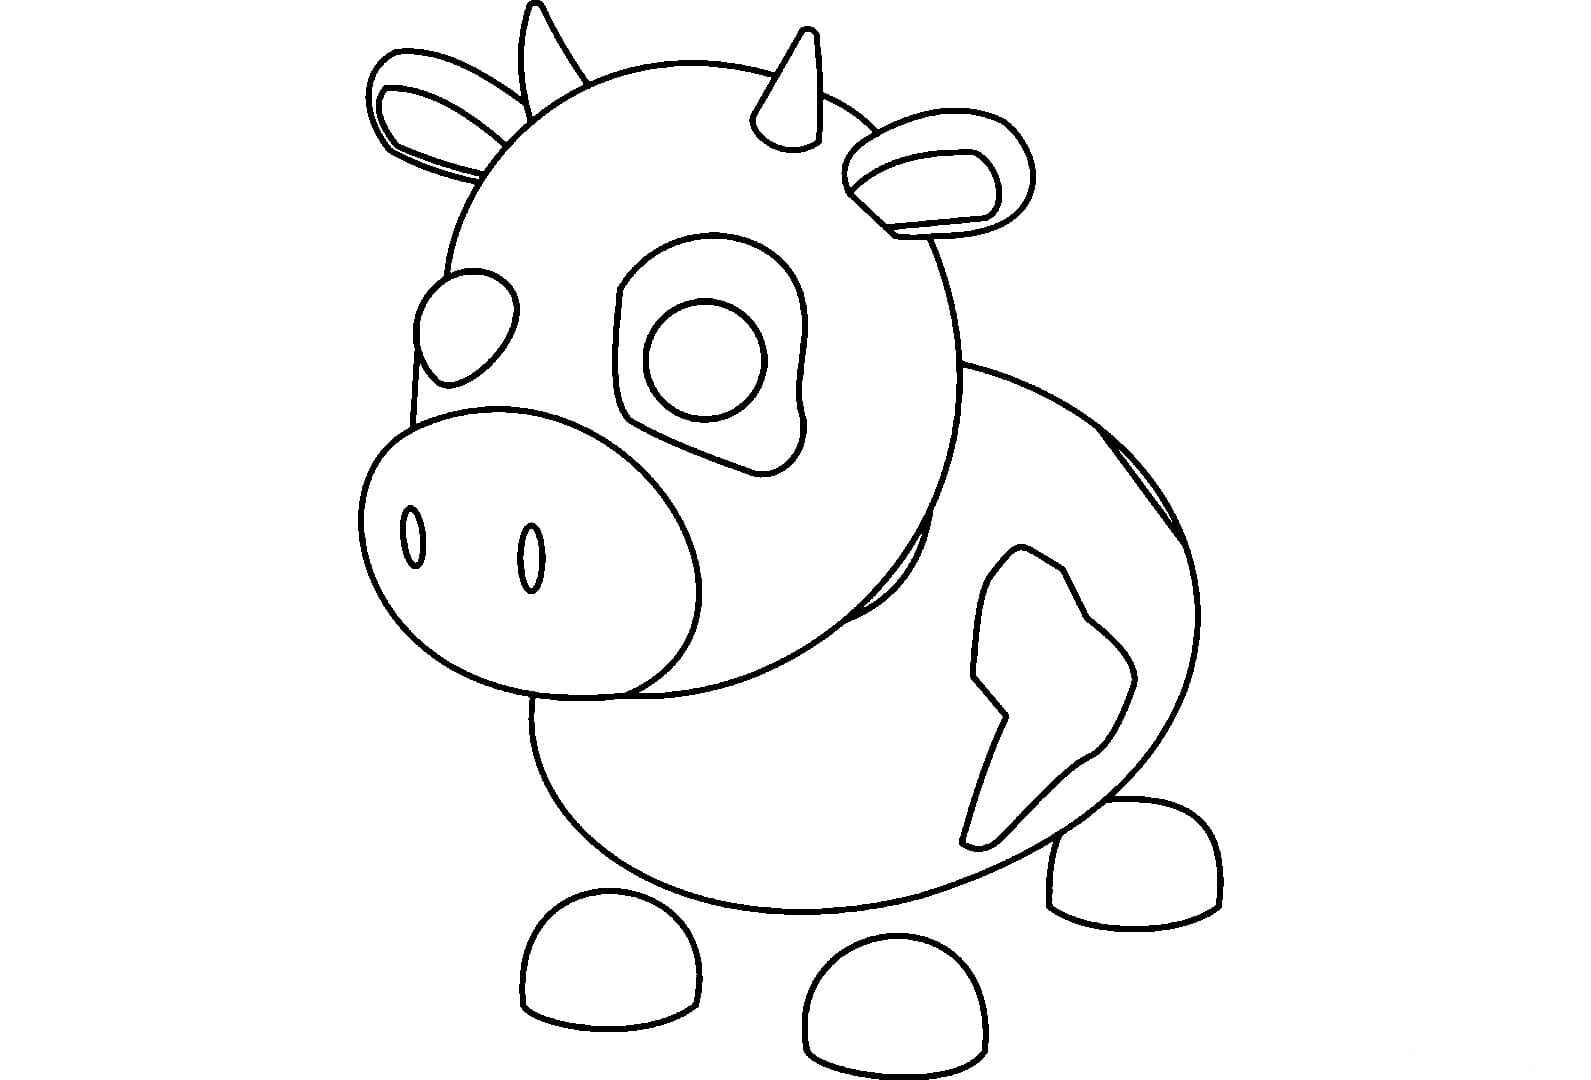 Cow can be hatched from the Farm Egg in Adopt me Coloring Pages